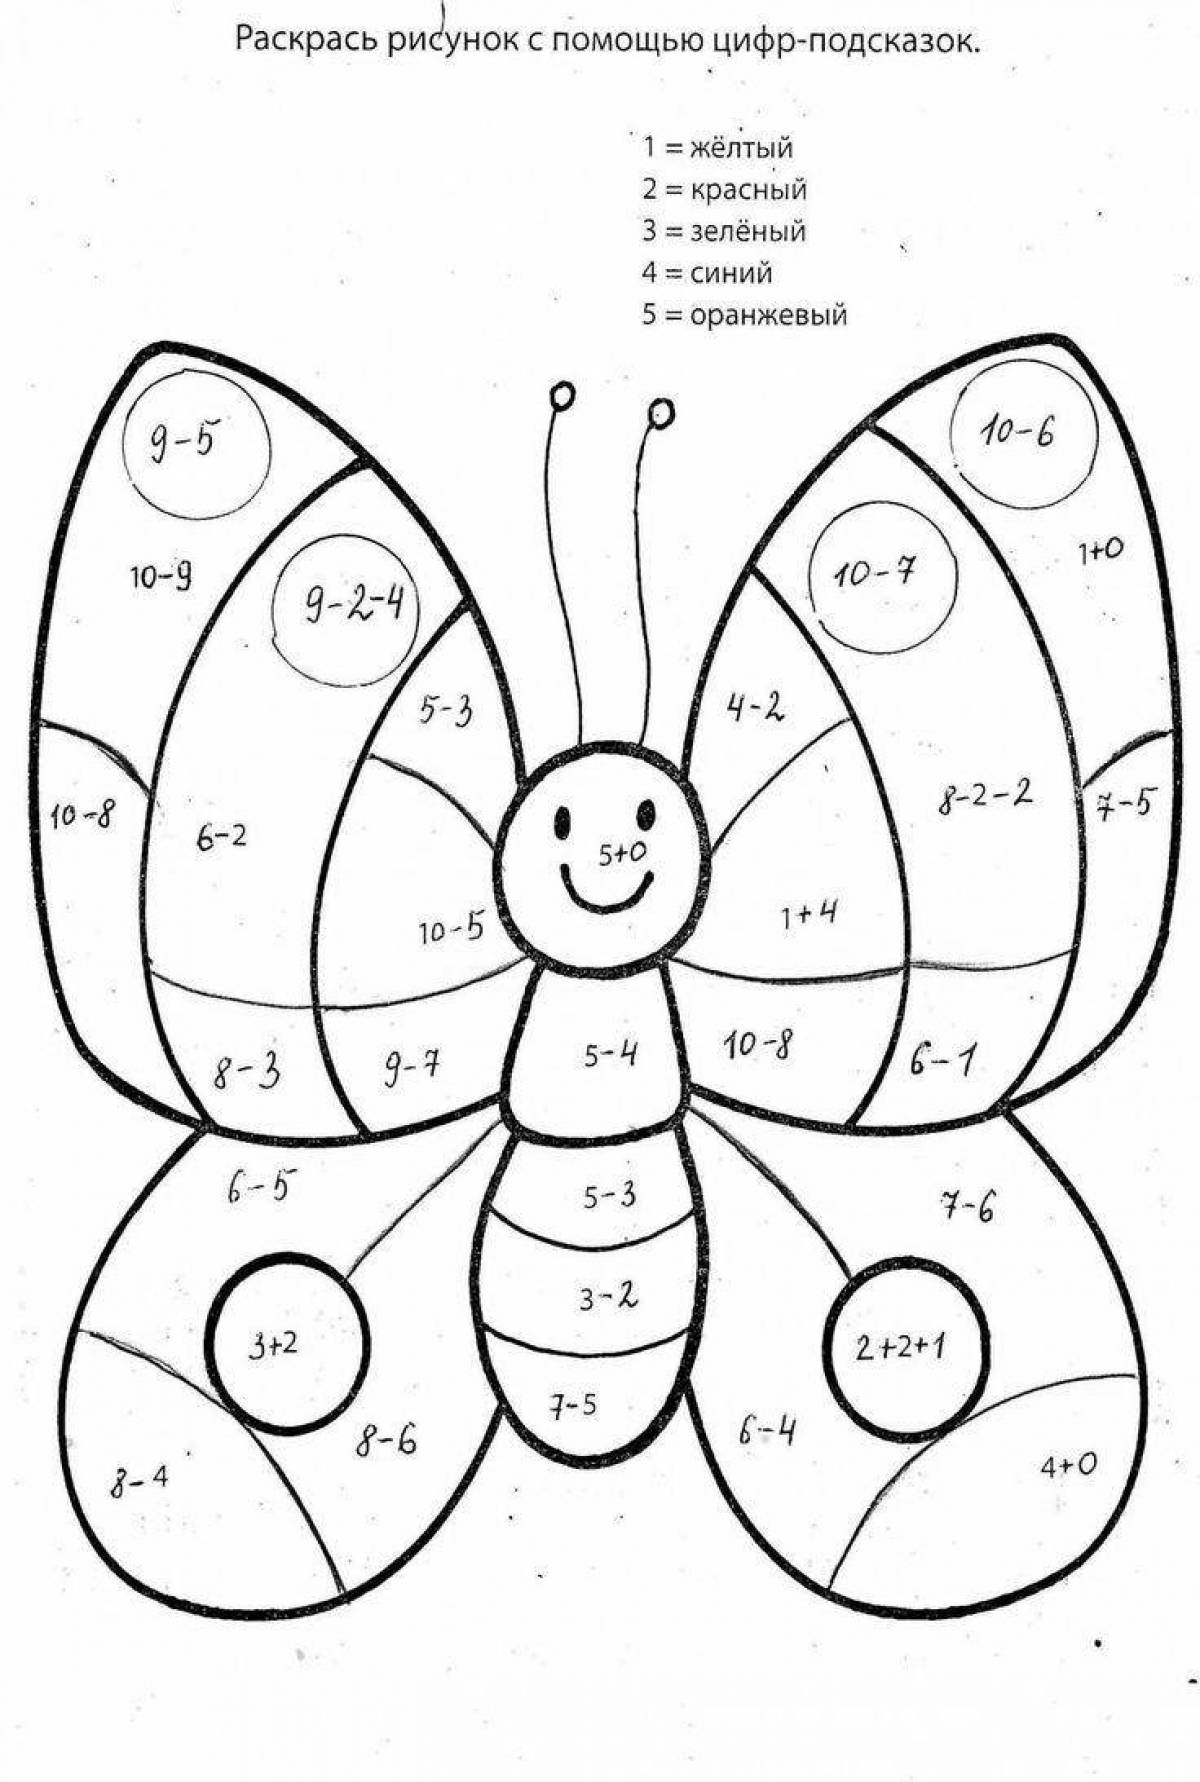 Creative quantity up to 10 coloring pages